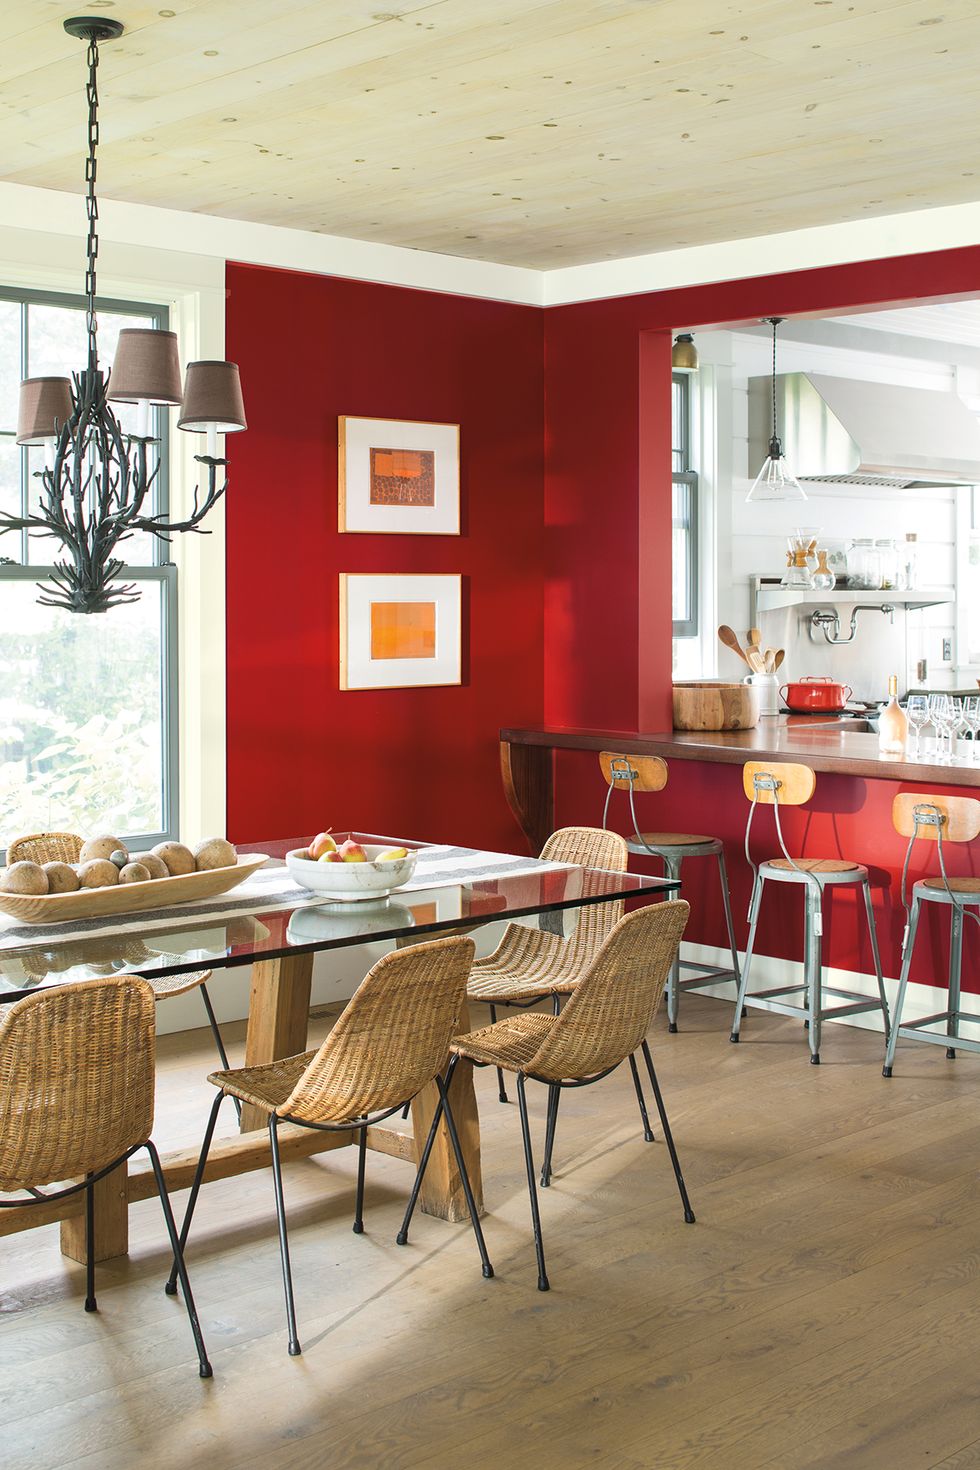 Benjamin Moore Colour of the Year 2018 - Caliente AF-290